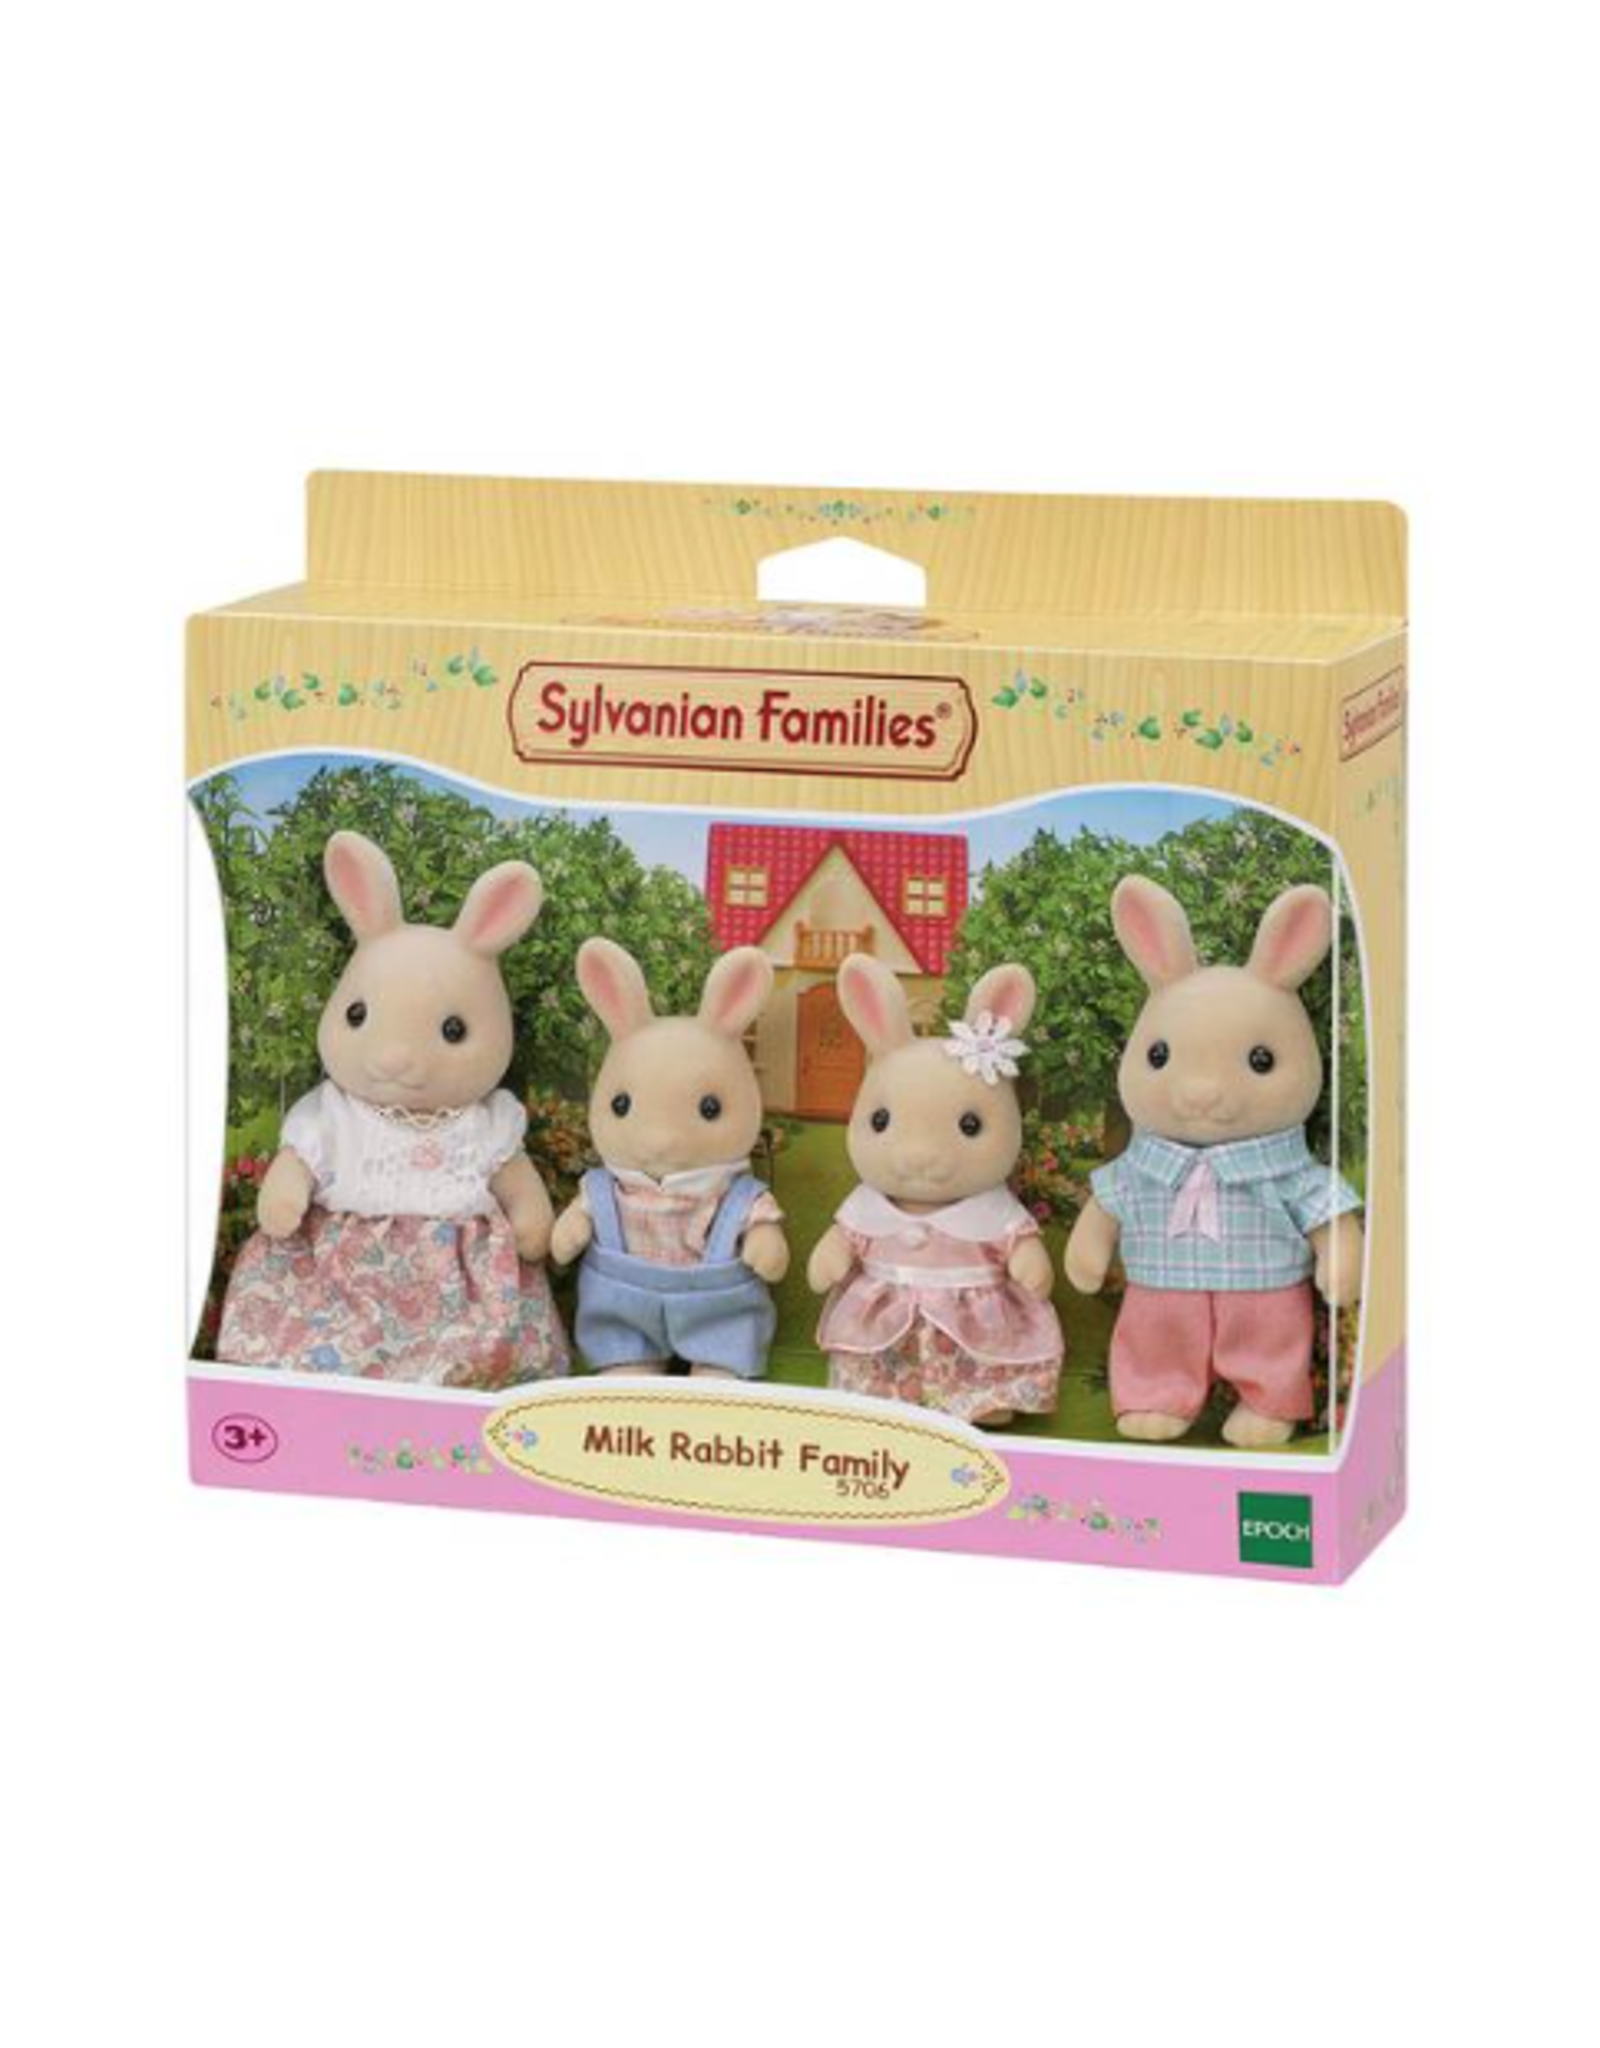 Calico Critters Calico Critters Milk Rabbit Family